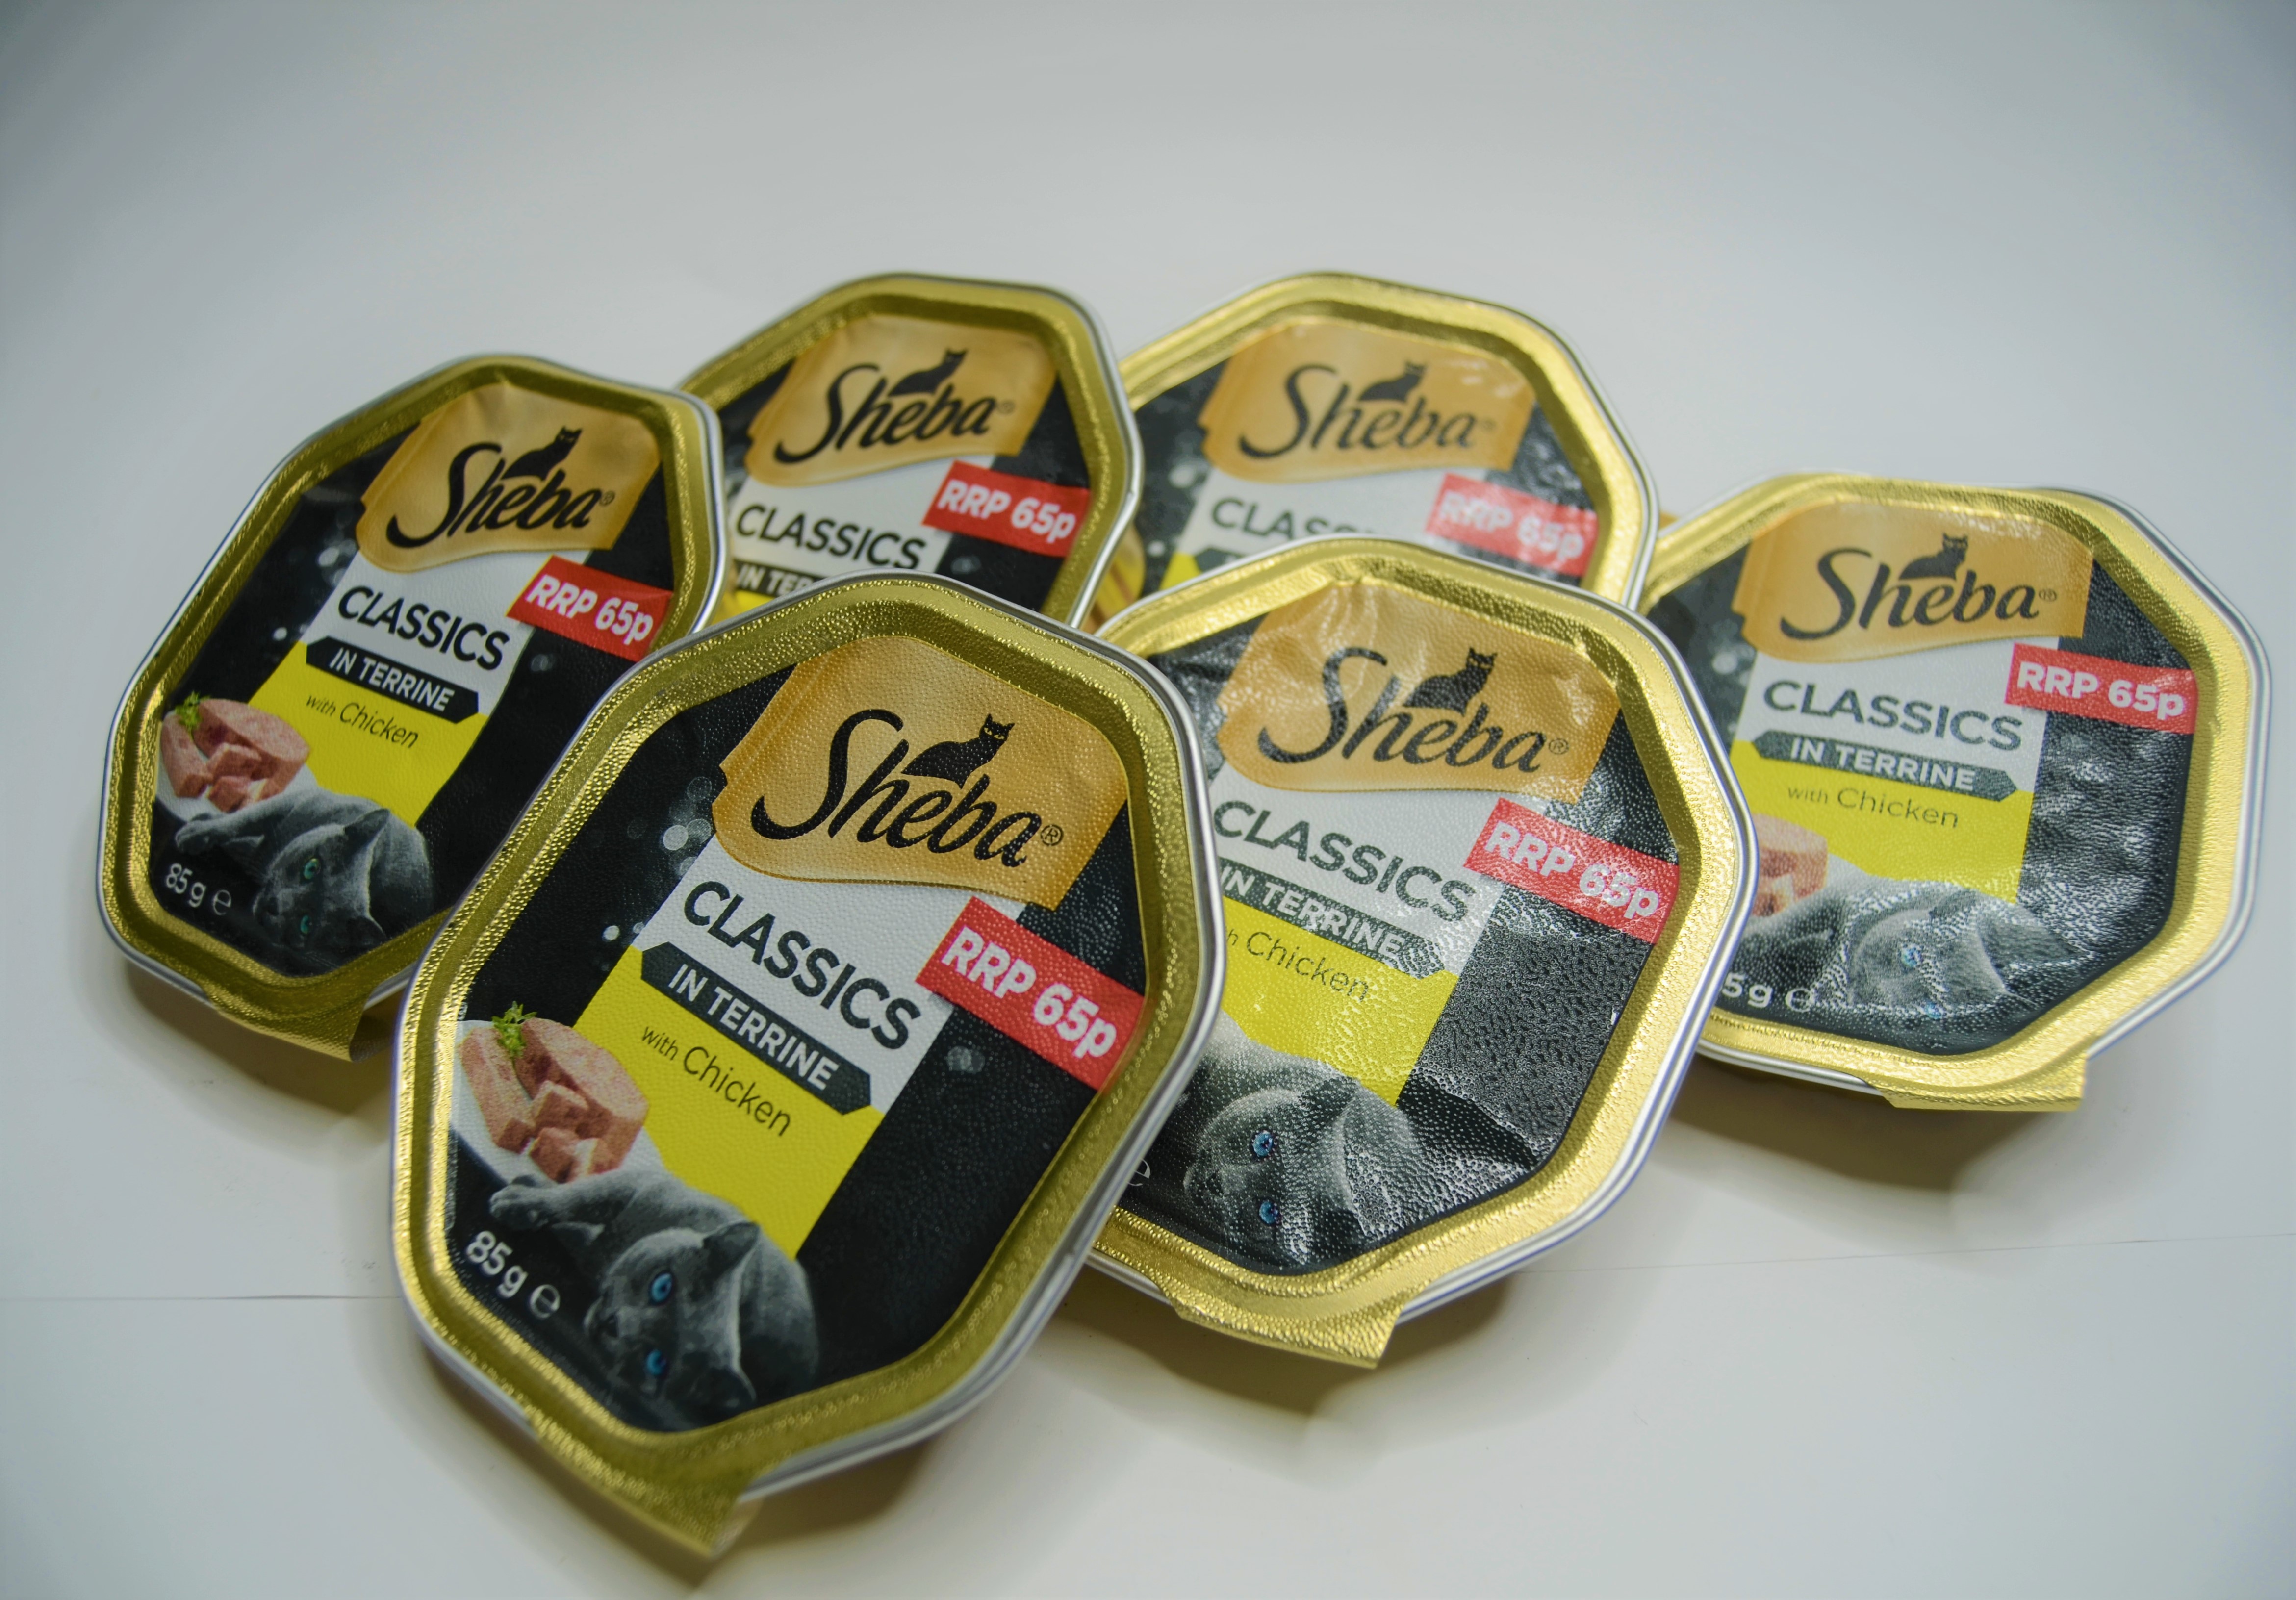 Sheba In Terrine With Chicken Pack Of 6 - (6x85gm)